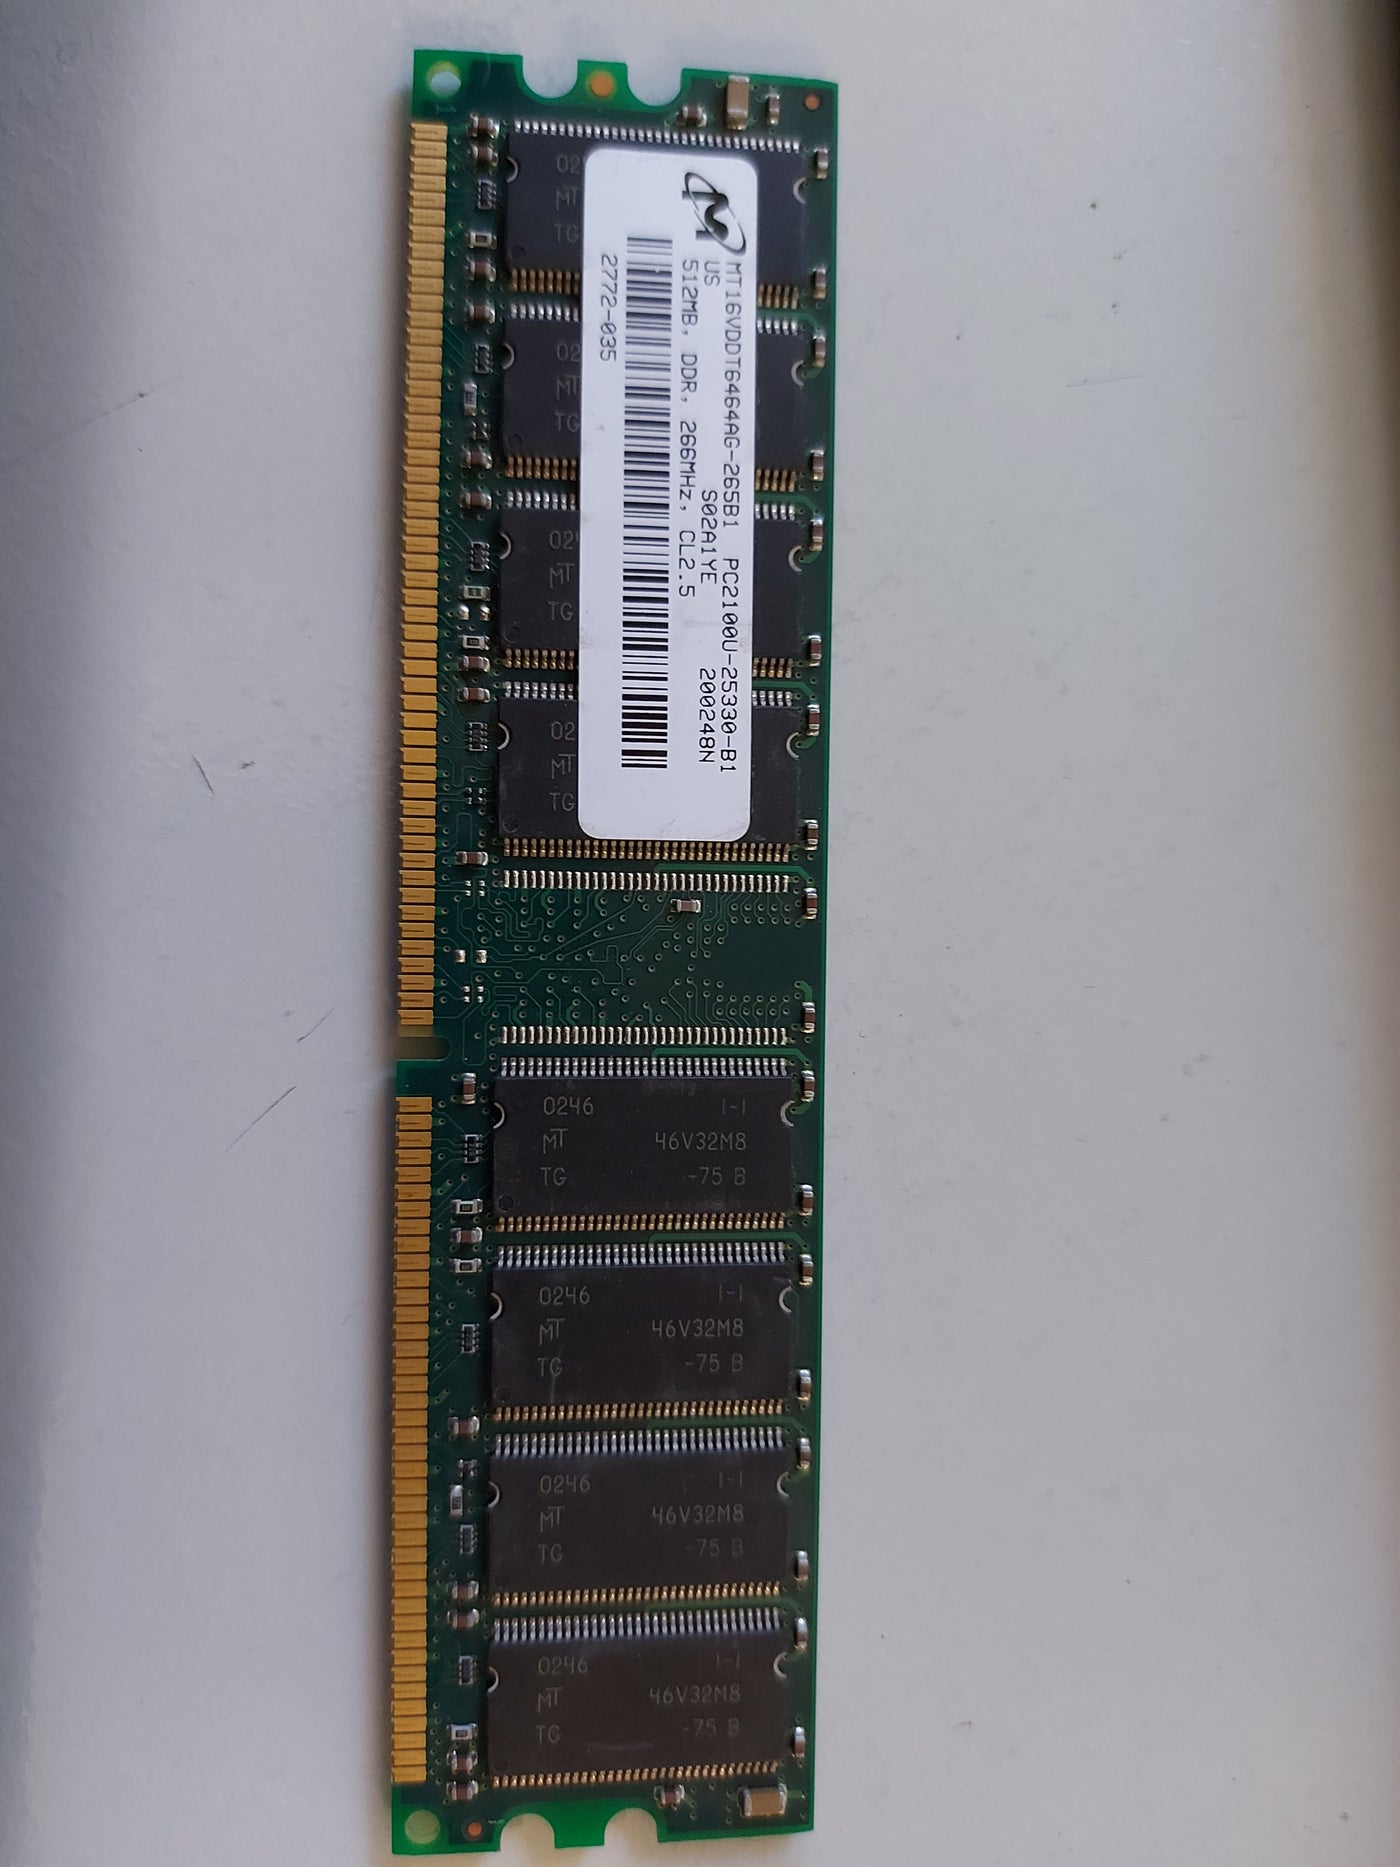 Micron 512MB PC2100 DDR nonECC Unbuffered CL2.5 184P DIMM MT16VDDT6464AG-265B1